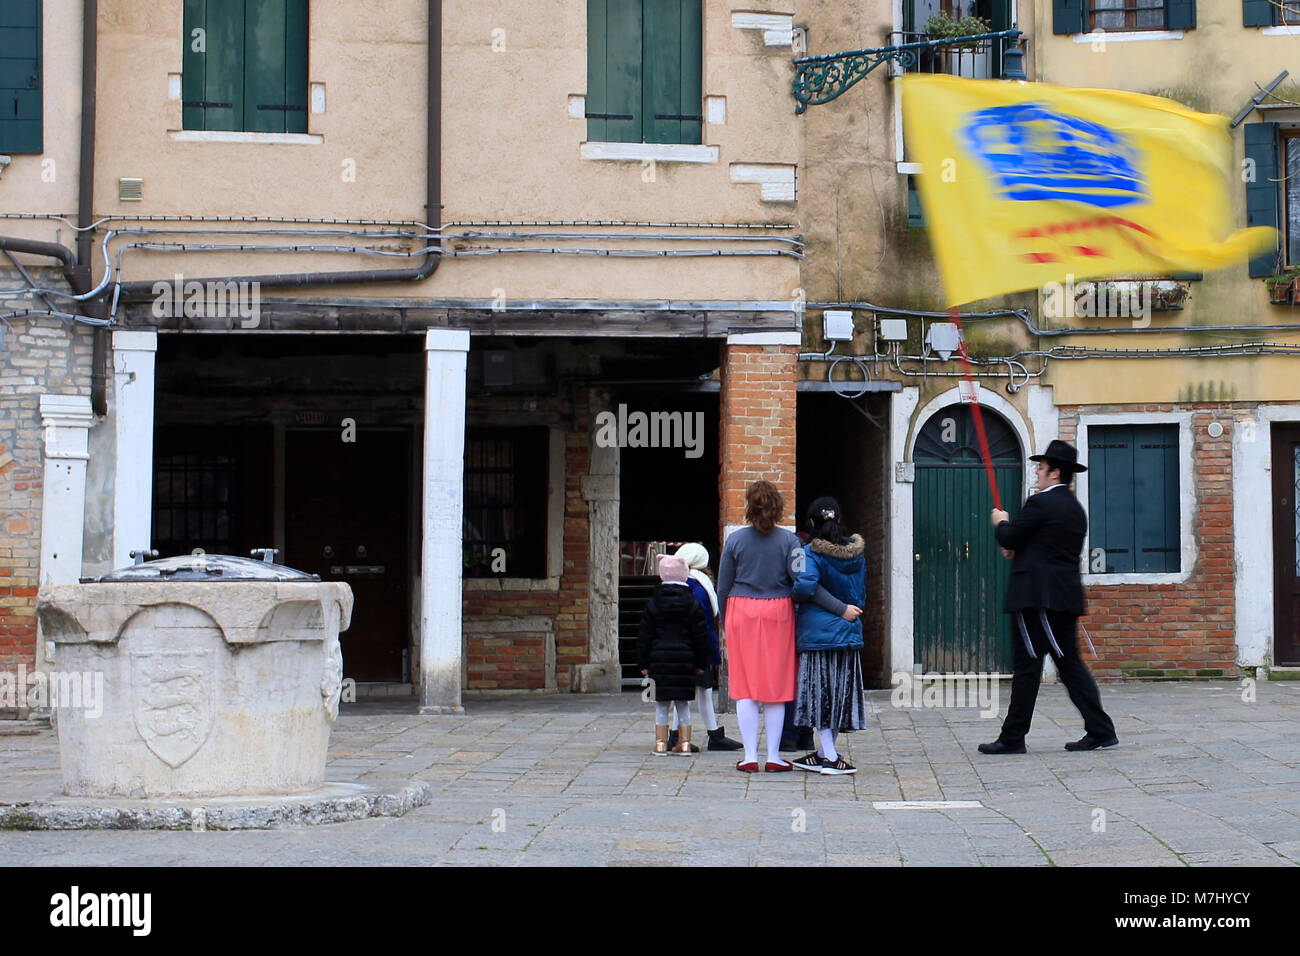 Venice, Italy. 10th, Mar 2018. A member and Childs the Jewish Community of Venice celebrated after ceremony the Shabbat day, is located in Venice in the Cannaregio district. The 'Campo del Ghetto Nuovo' became the heart of the Jewish community in Venice. The Campo del Ghetto Nuovo is the true center of the Jewish Ghetto of Venice. This ghetto was the first in the world and took its name from an existing foundry where they melted or 'threw' the metals needed for naval construction in the Arsenal. Hence the name 'jet' and therefore 'ghetto', in which everyone now recognizes a place of segregatio Stock Photo